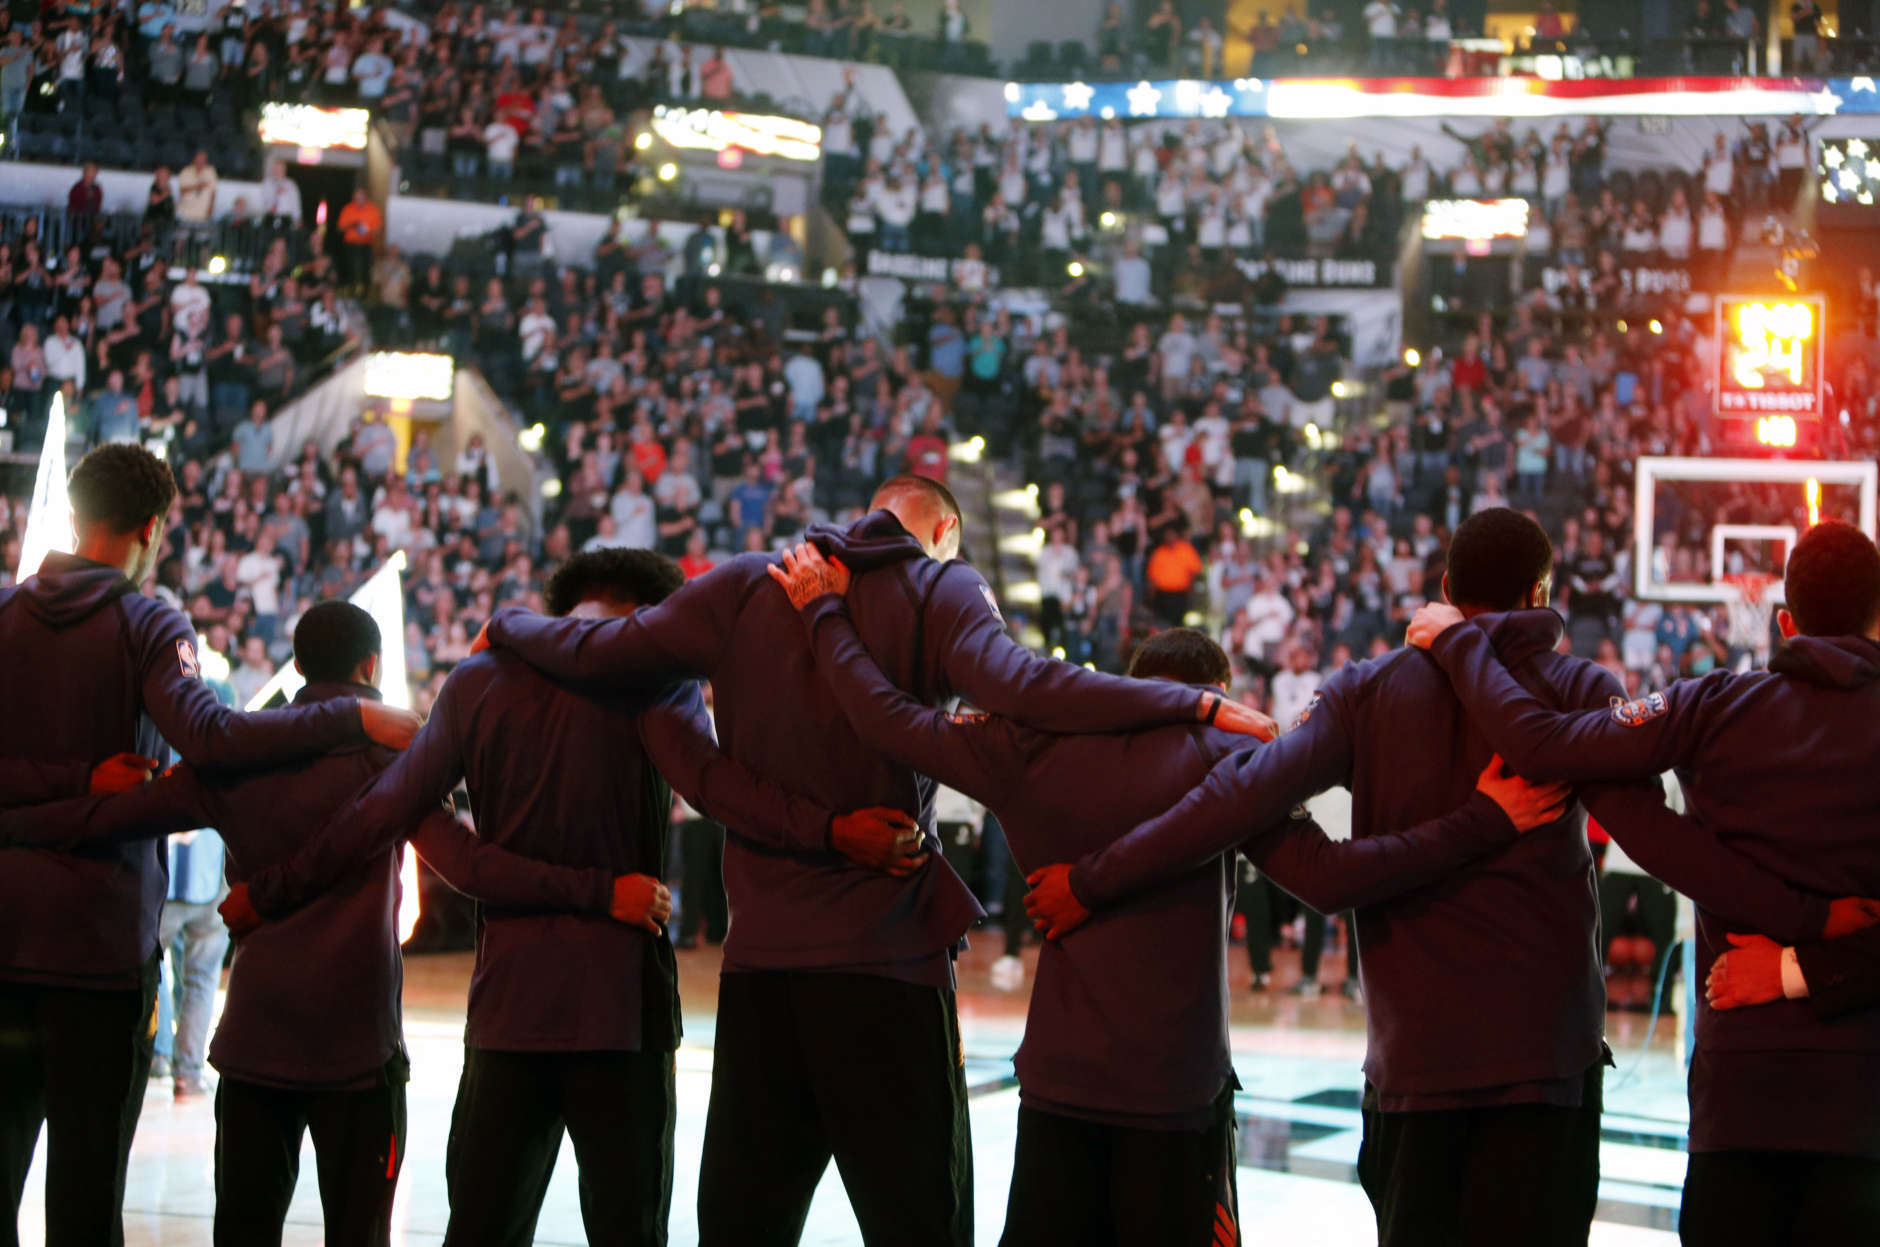 Members of the Phoenix Suns stand arm-in-arm during a moment of silence for the victims of a deadly church shooting in Texas before an NBA basketball team against the San Antonio Spurs, Sunday, Nov. 5, 2017 in San Antonio. (AP Photo/Ronald Cortes)